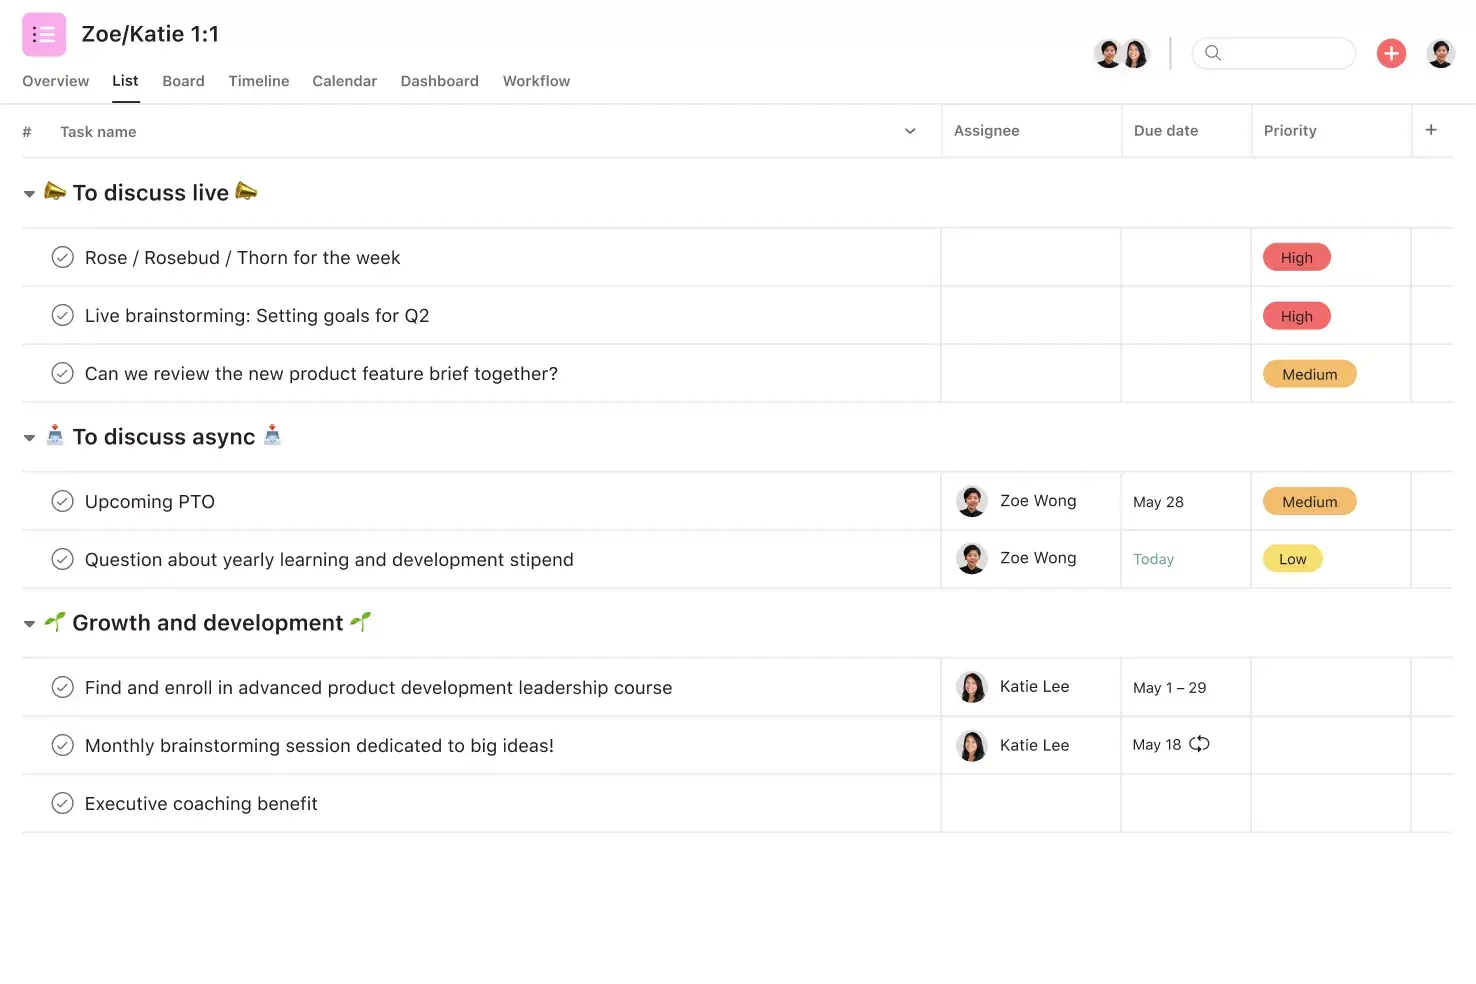 [Product ui] 1:1 agenda with face-to-face discussion topics, async topics, and growth and development (list view)